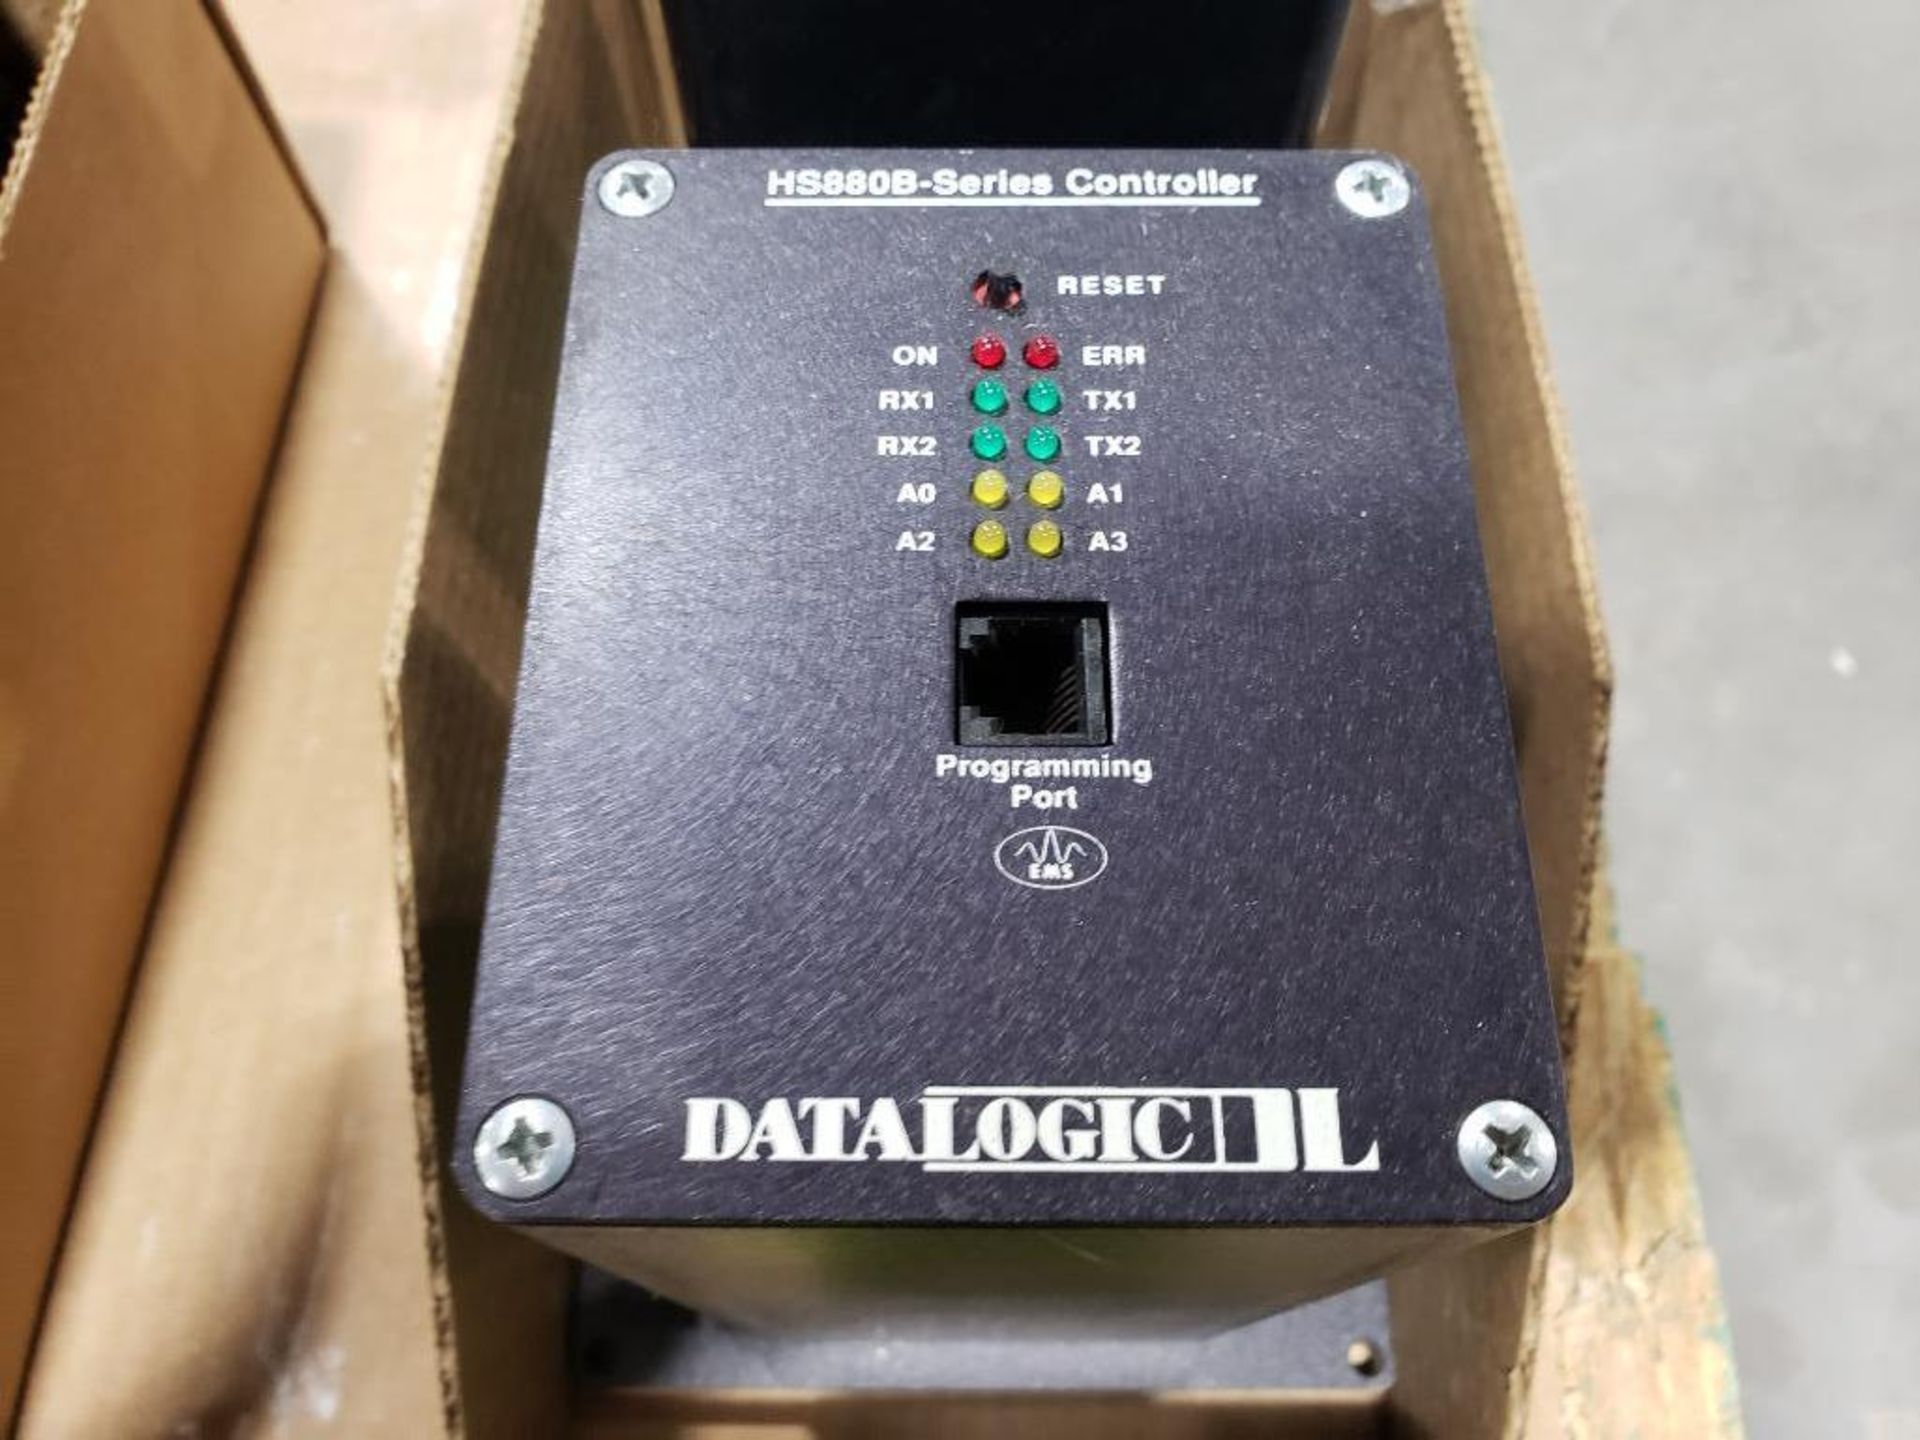 Qty 2 - Datalogic controller. Series HS880B. - Image 2 of 4